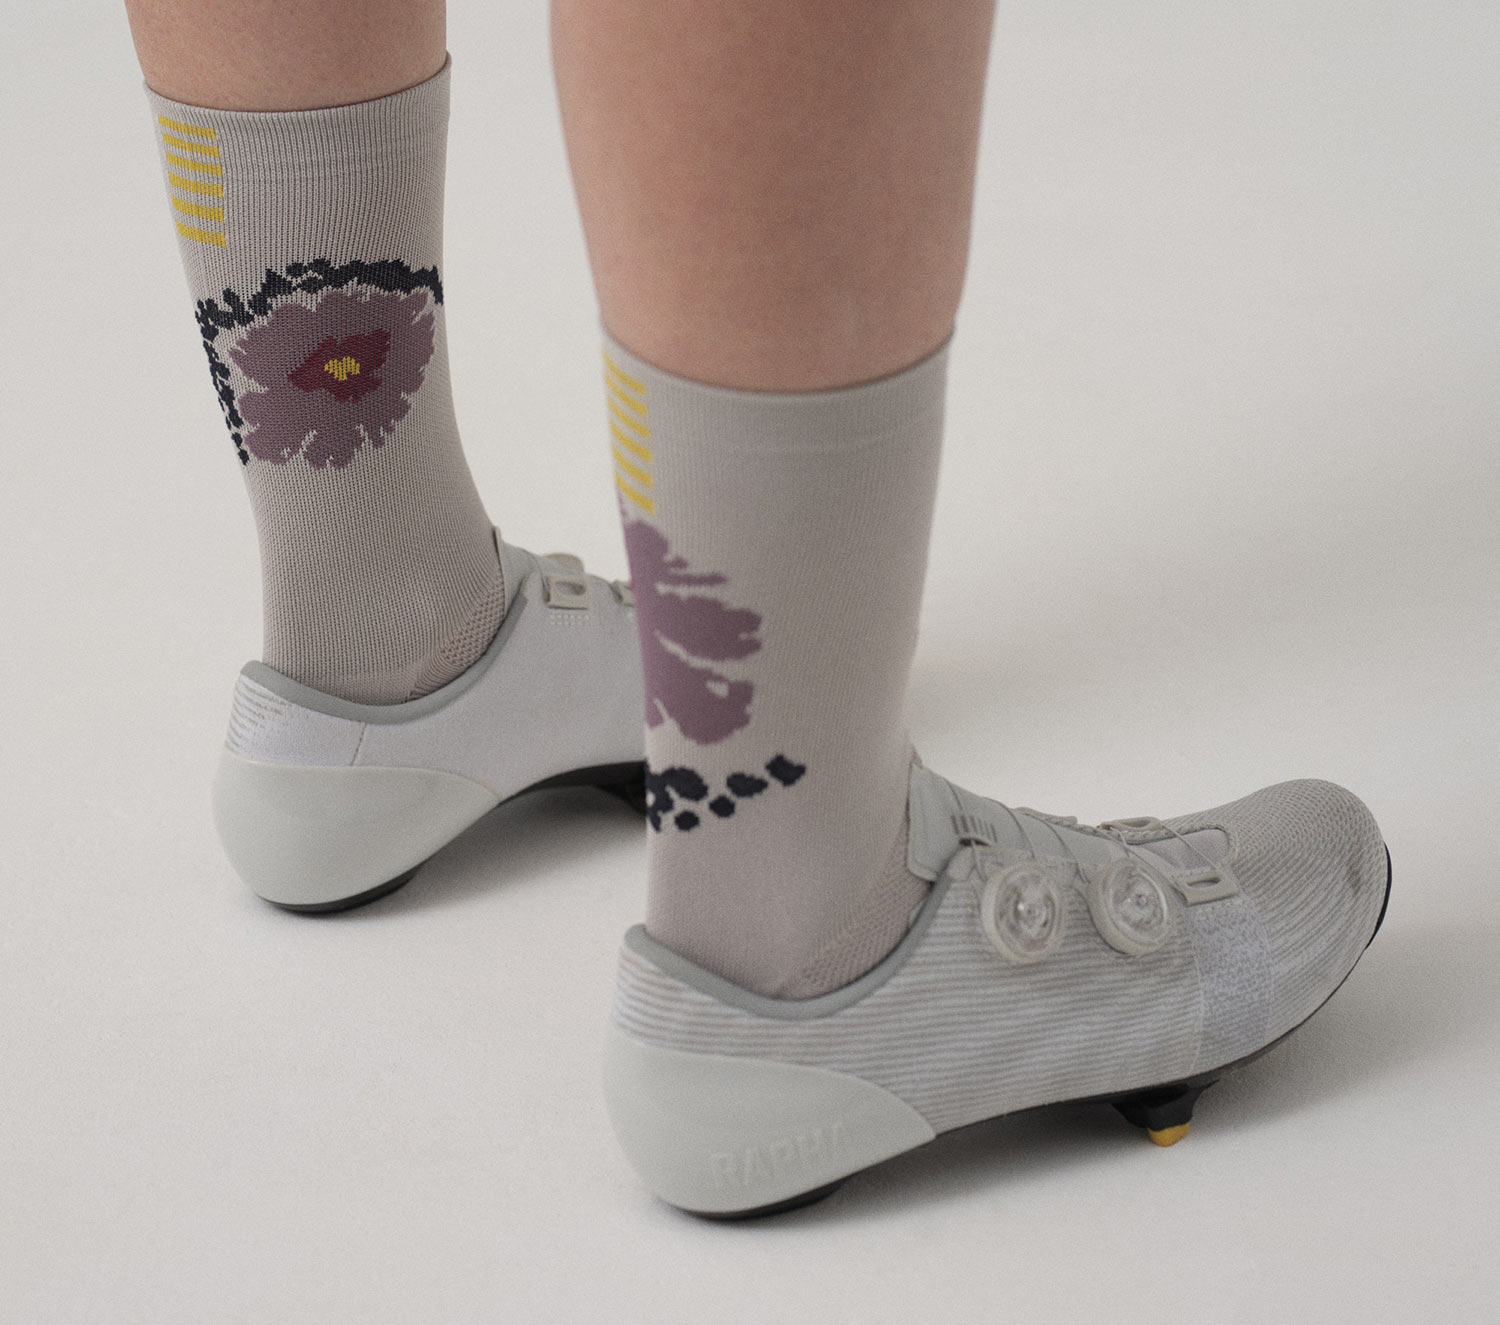 Rapha One More City kit supports secondary breast cancer research, Christine O'Connell, socks